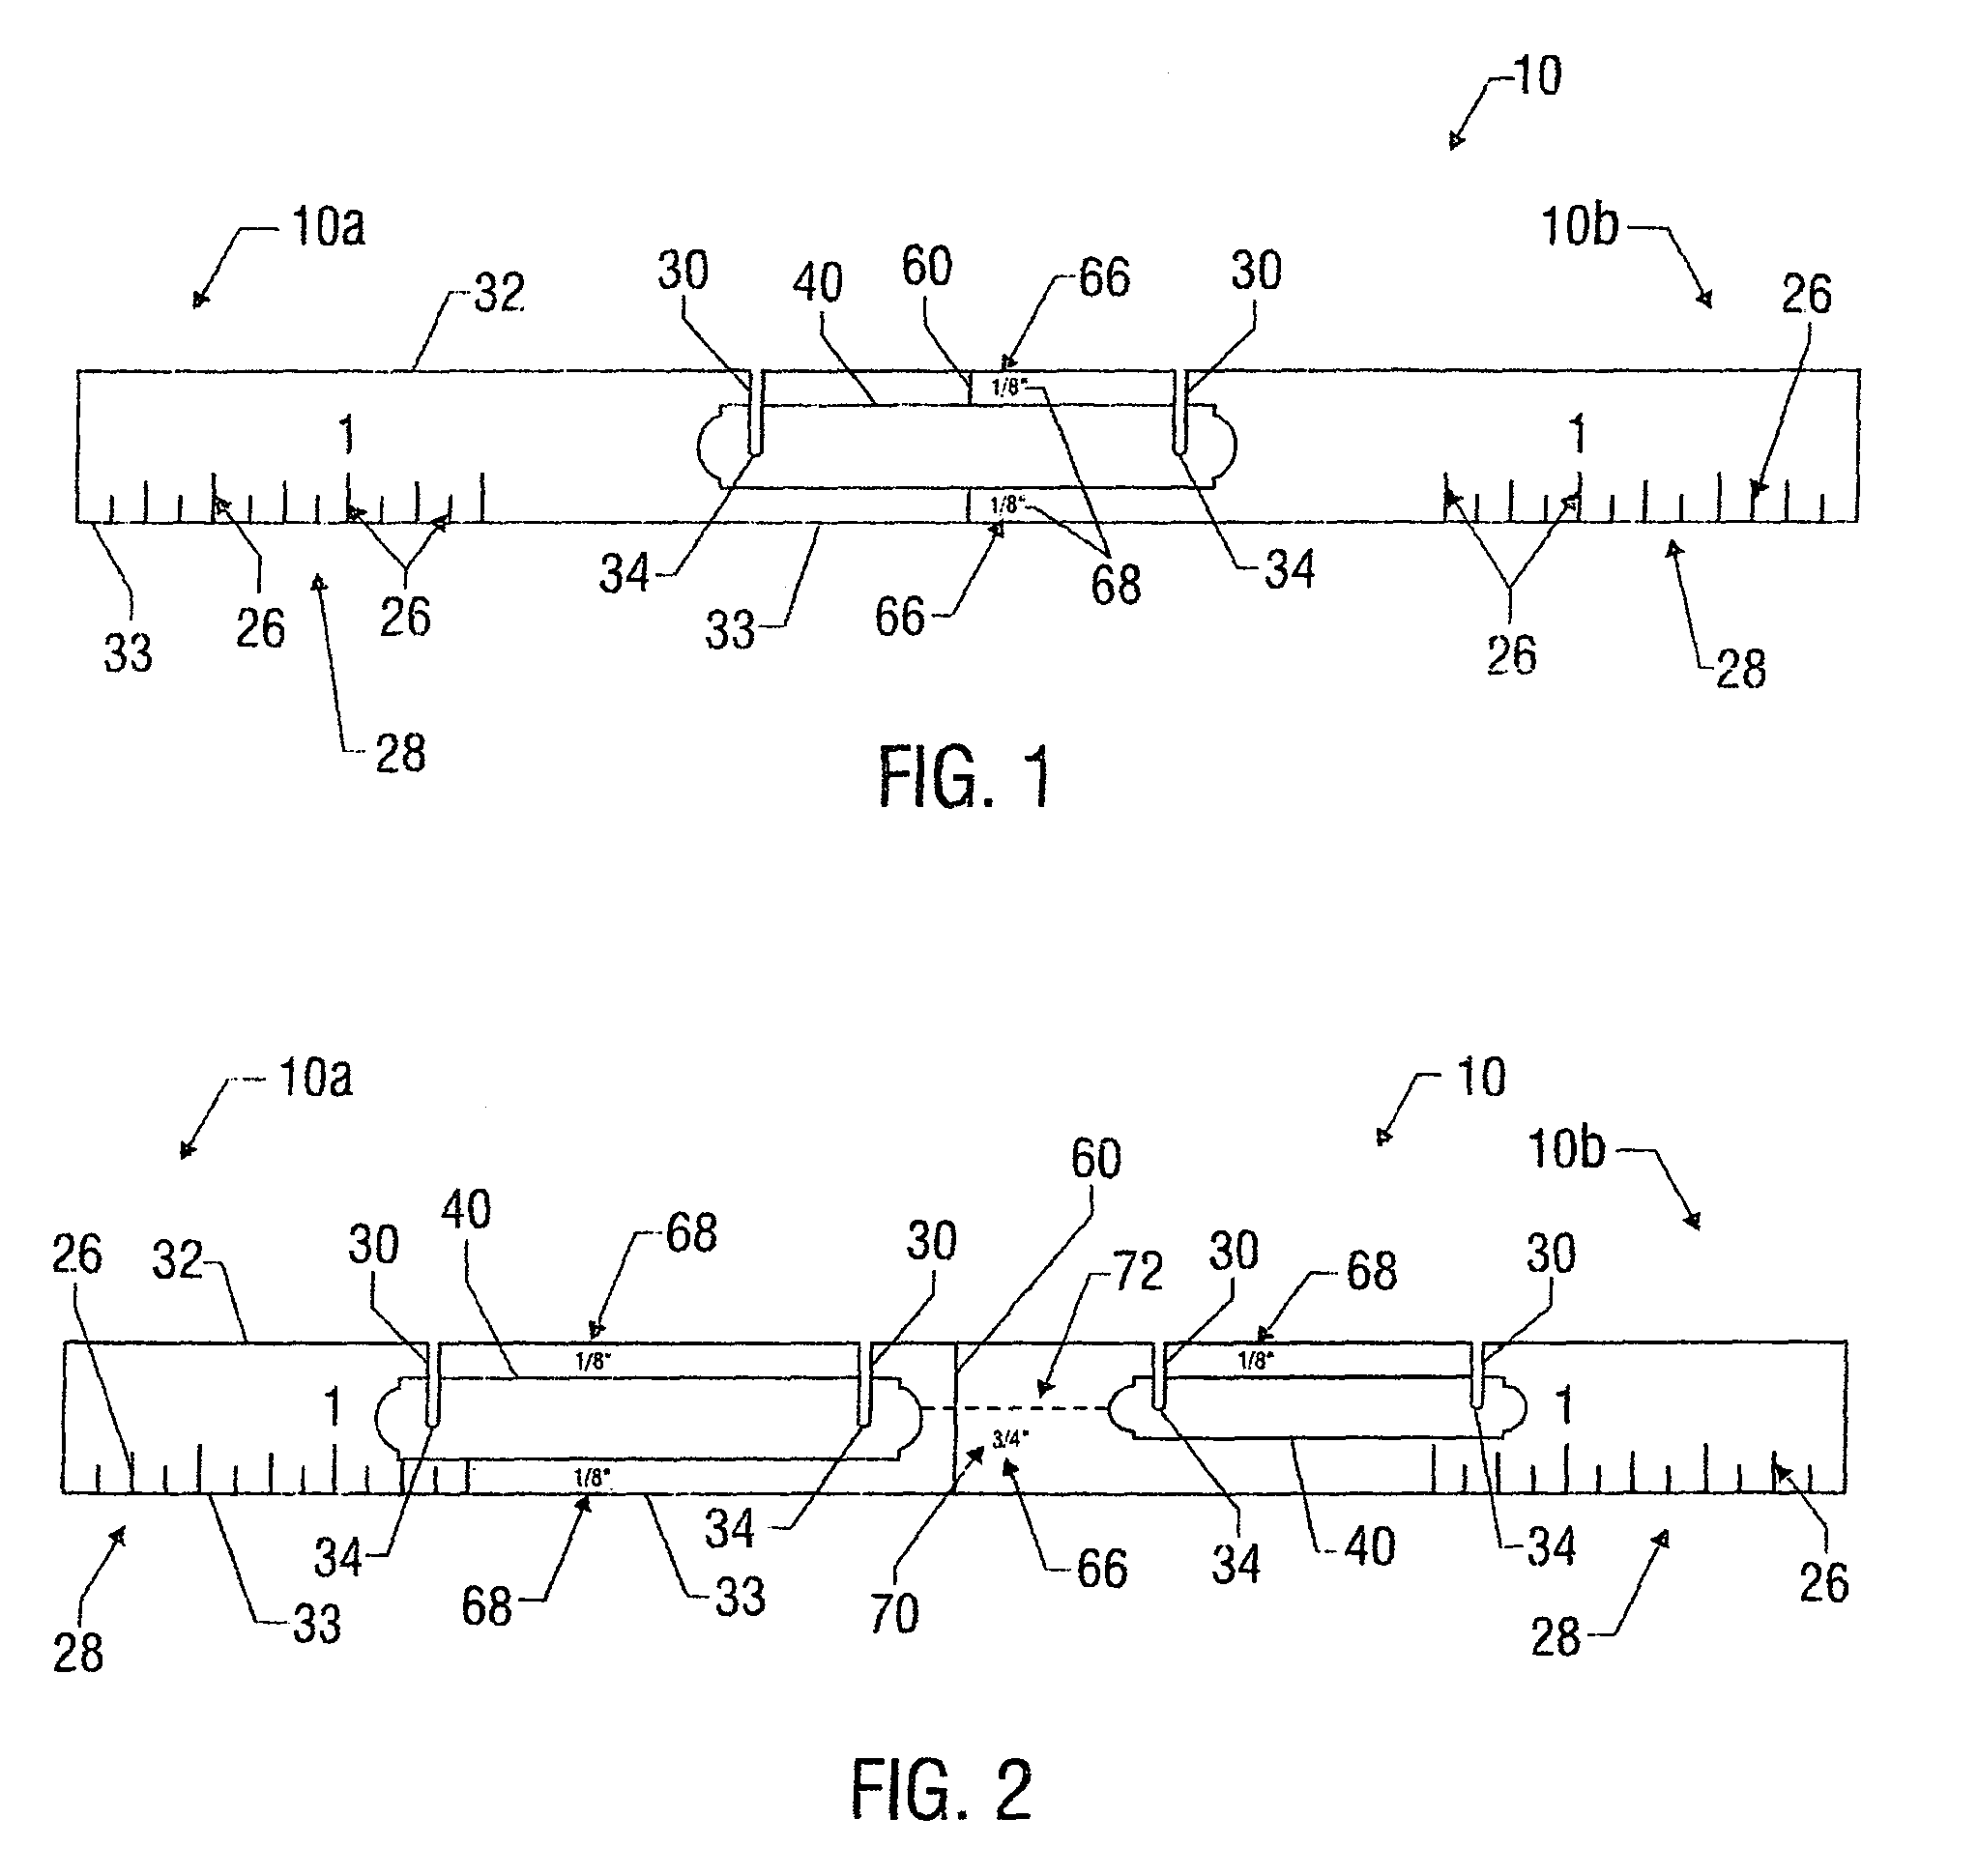 Apparatus and methods for the placement of badges, ribbons and/or other items